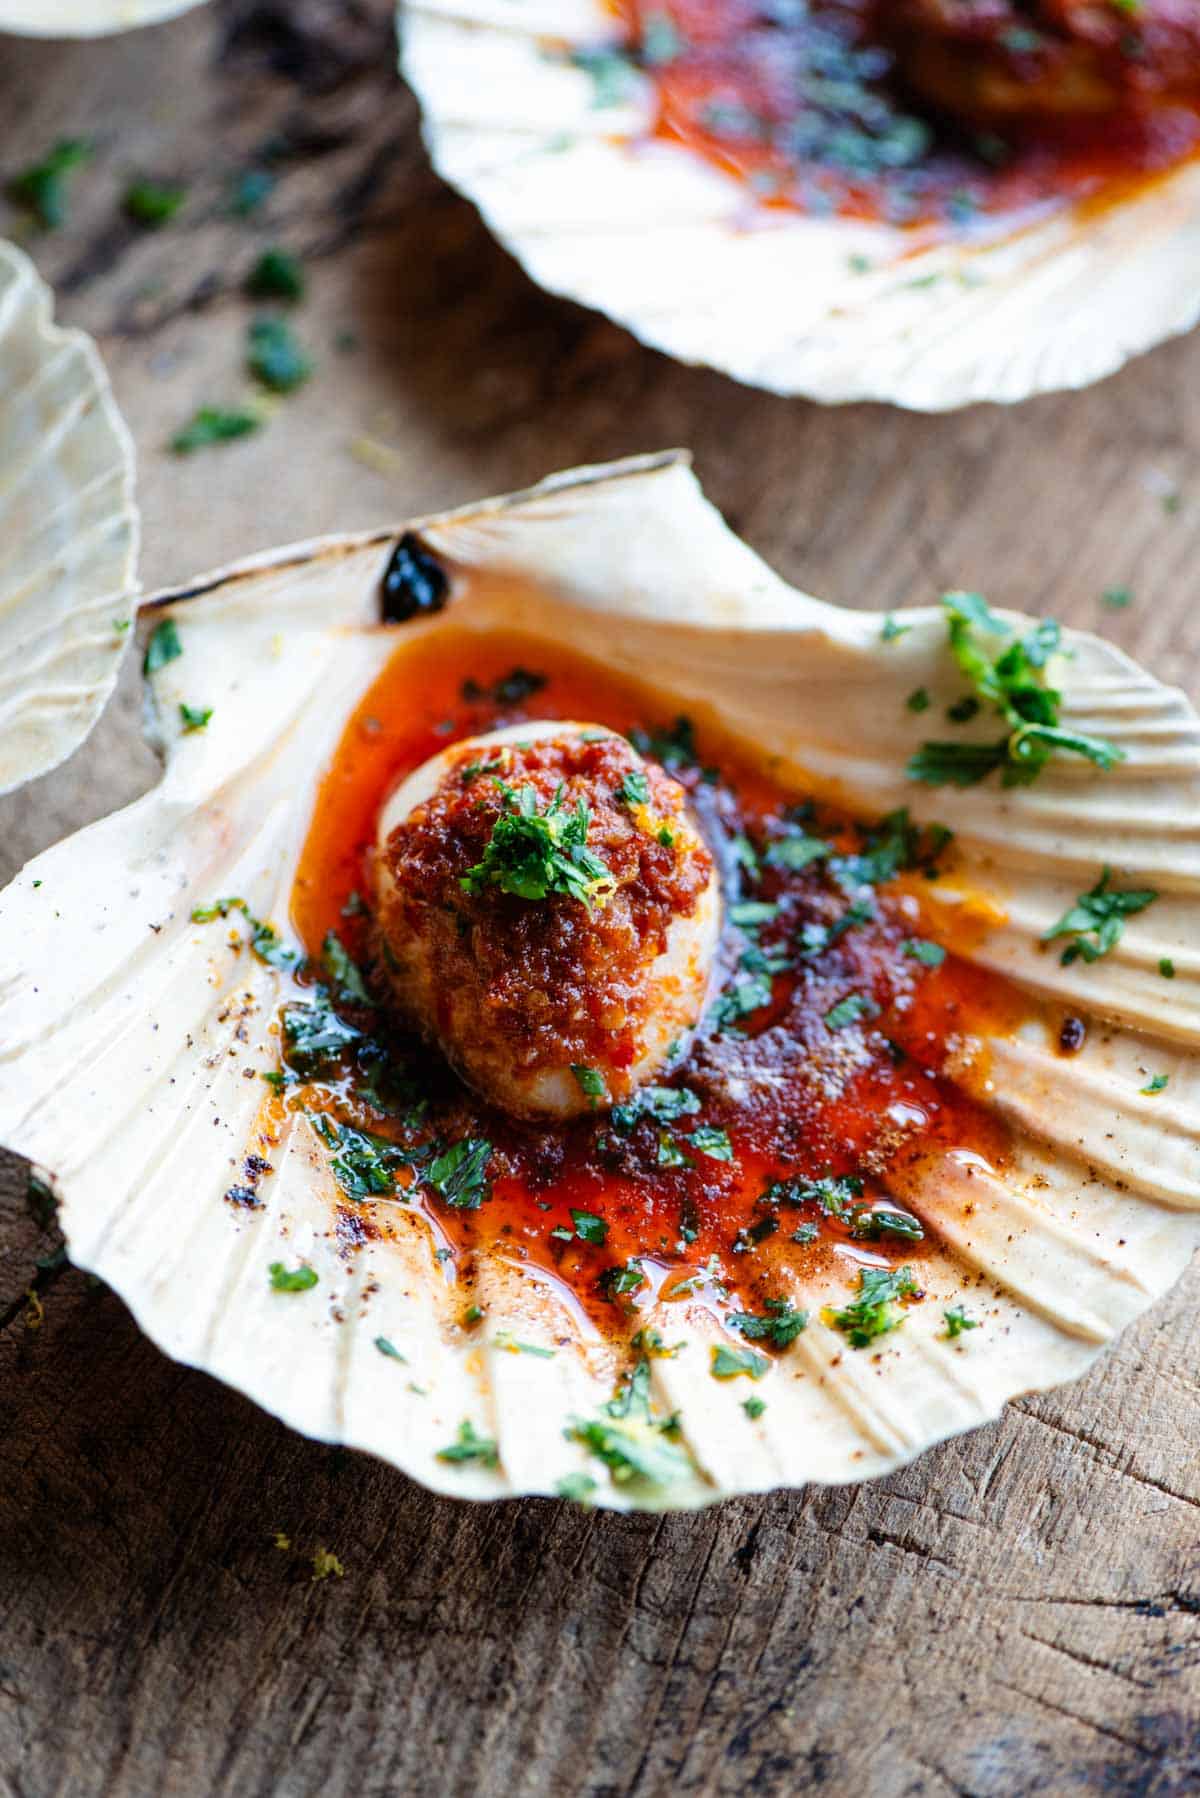 A close up side shot of a scallop in its shell with Nduja garlic butter on top and garnished with parsley.